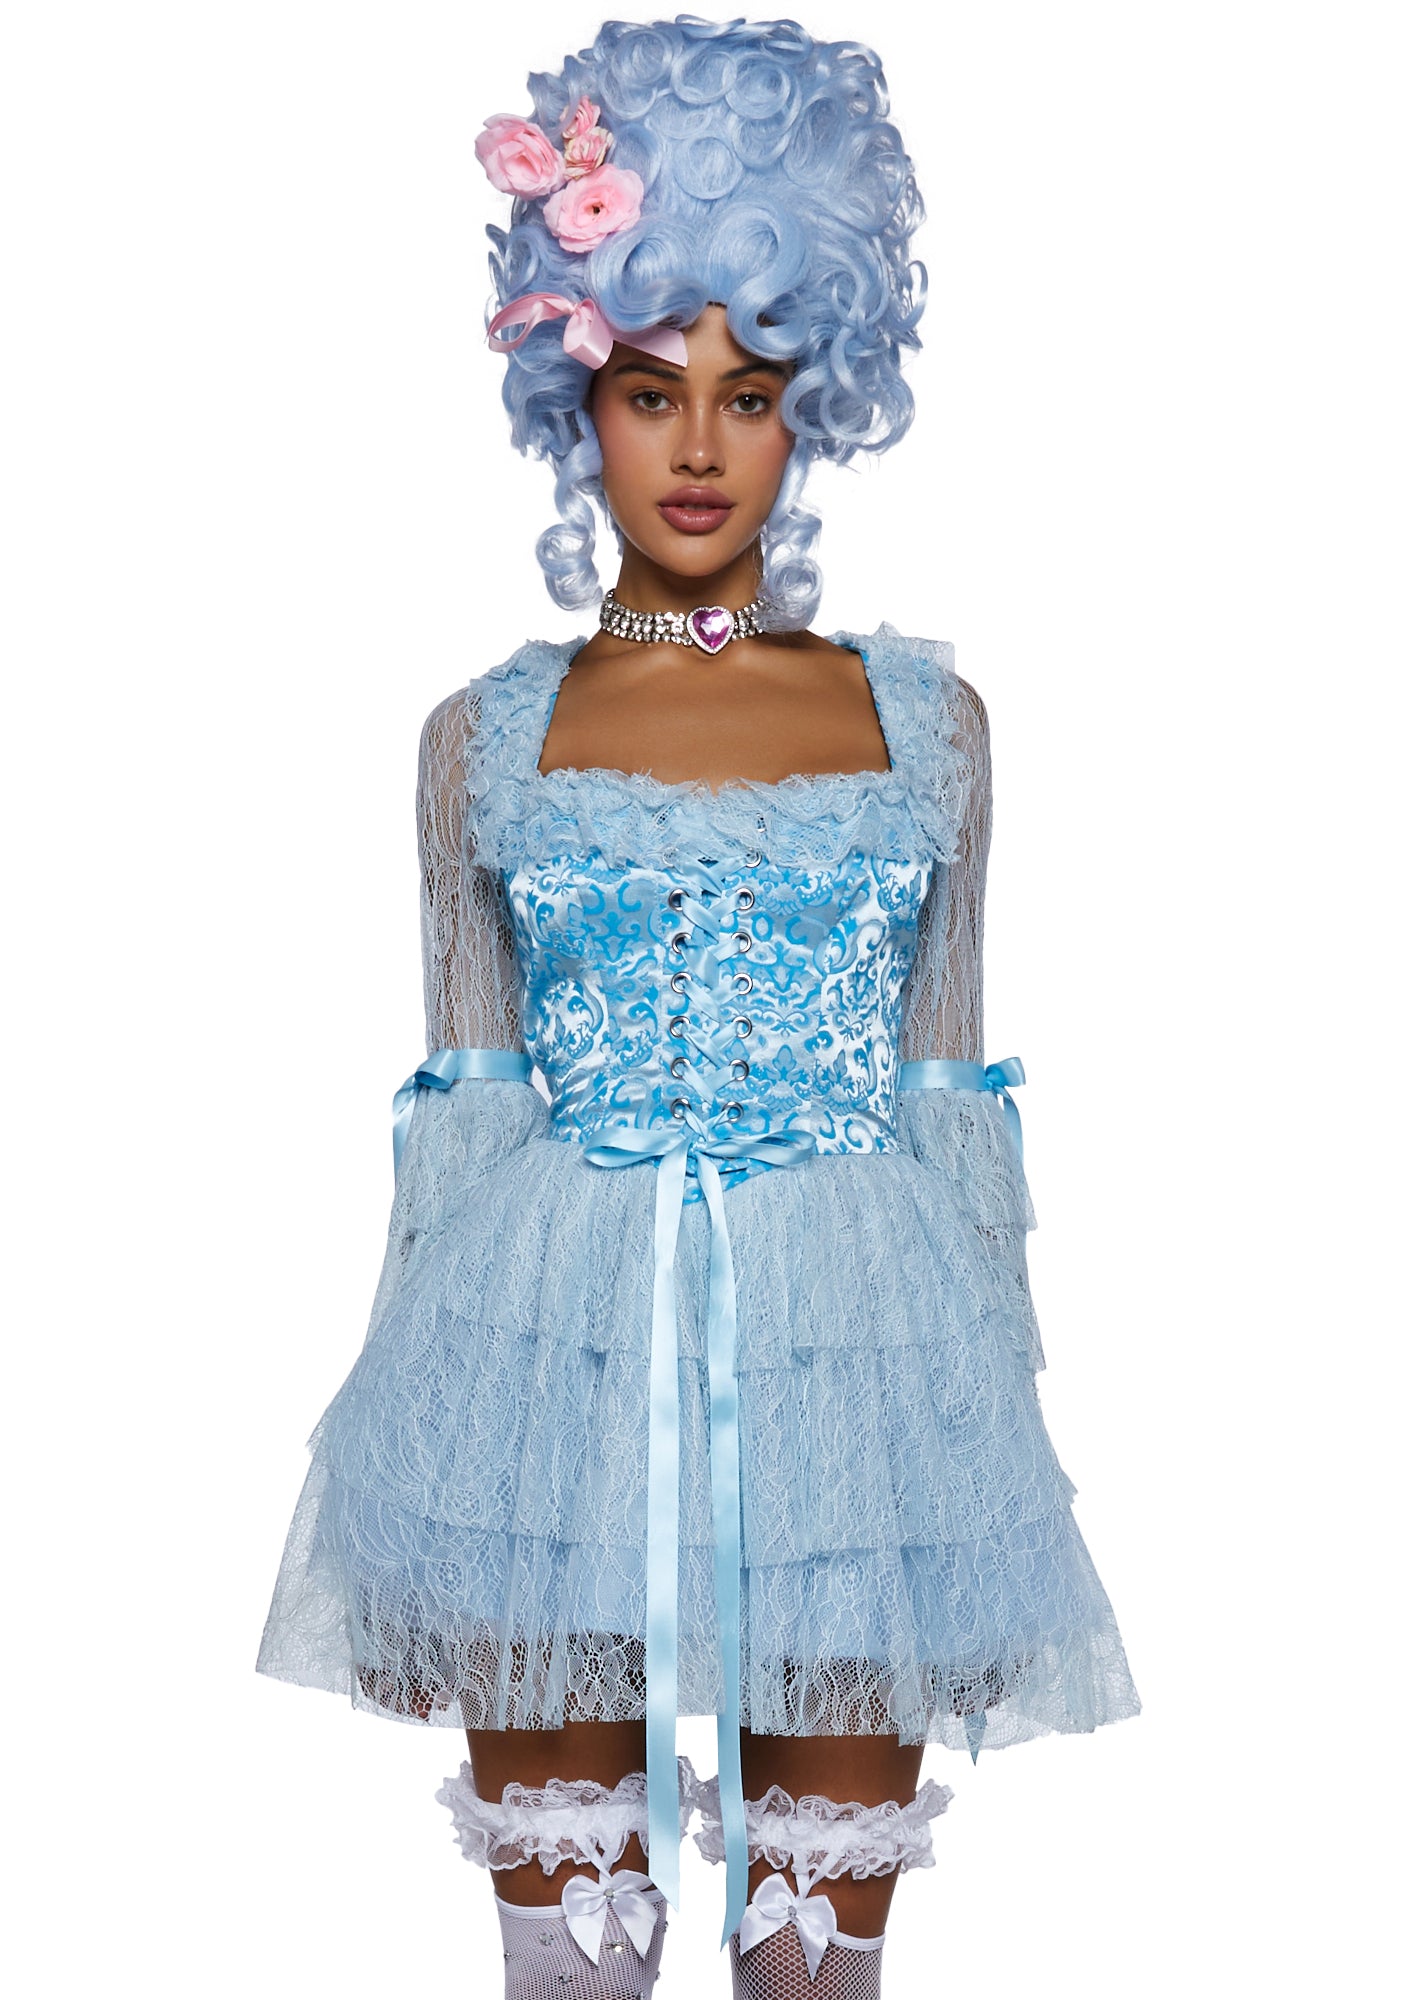 Marie Antoinette French Queen Costume - Blue